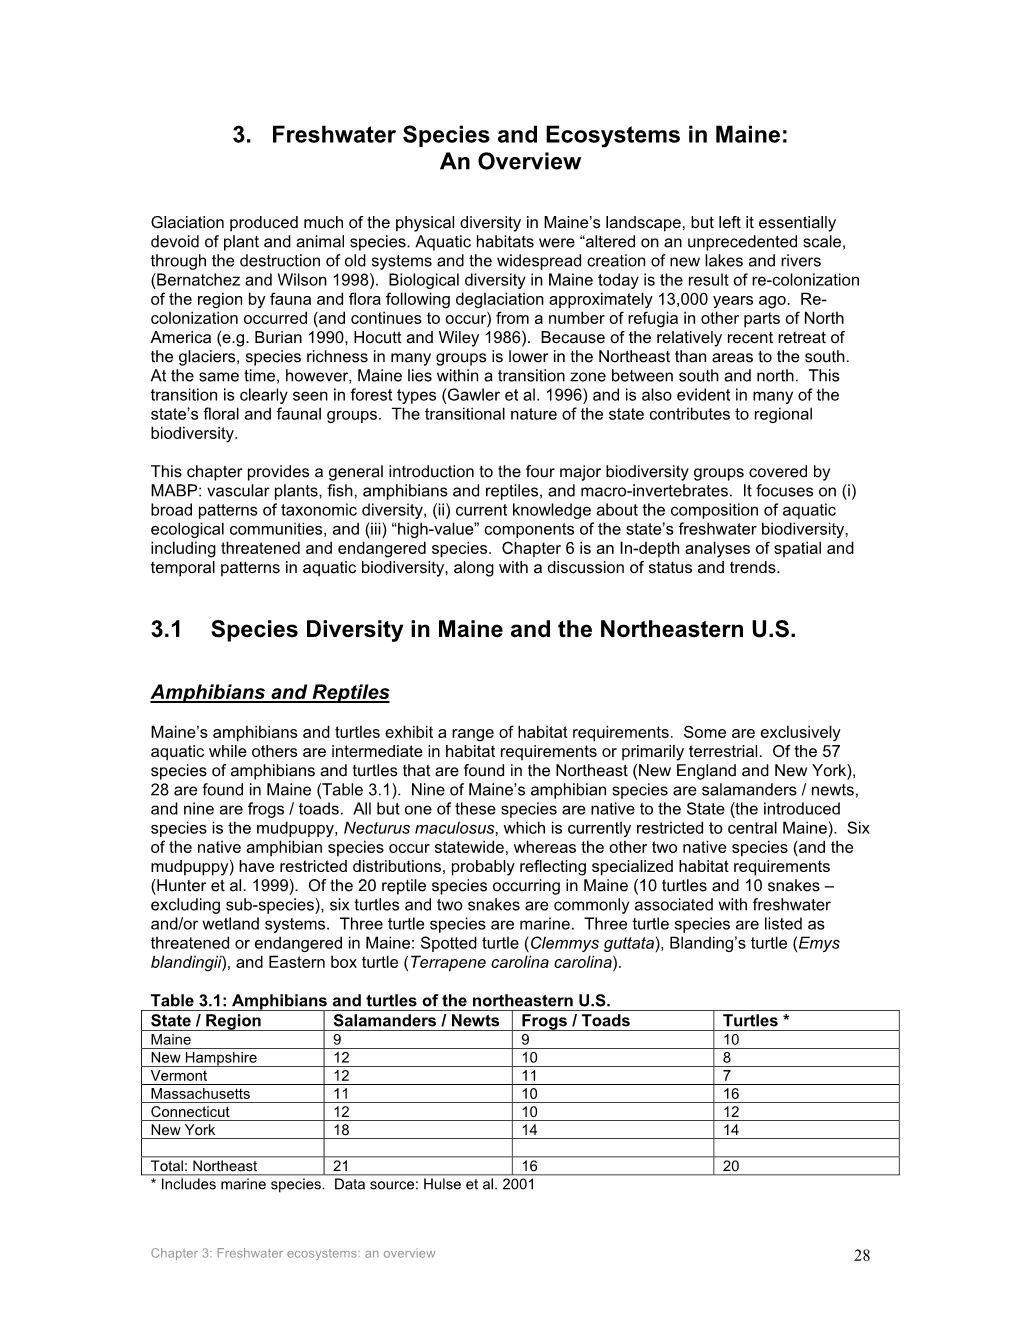 3. Freshwater Species and Ecosystems in Maine: an Overview